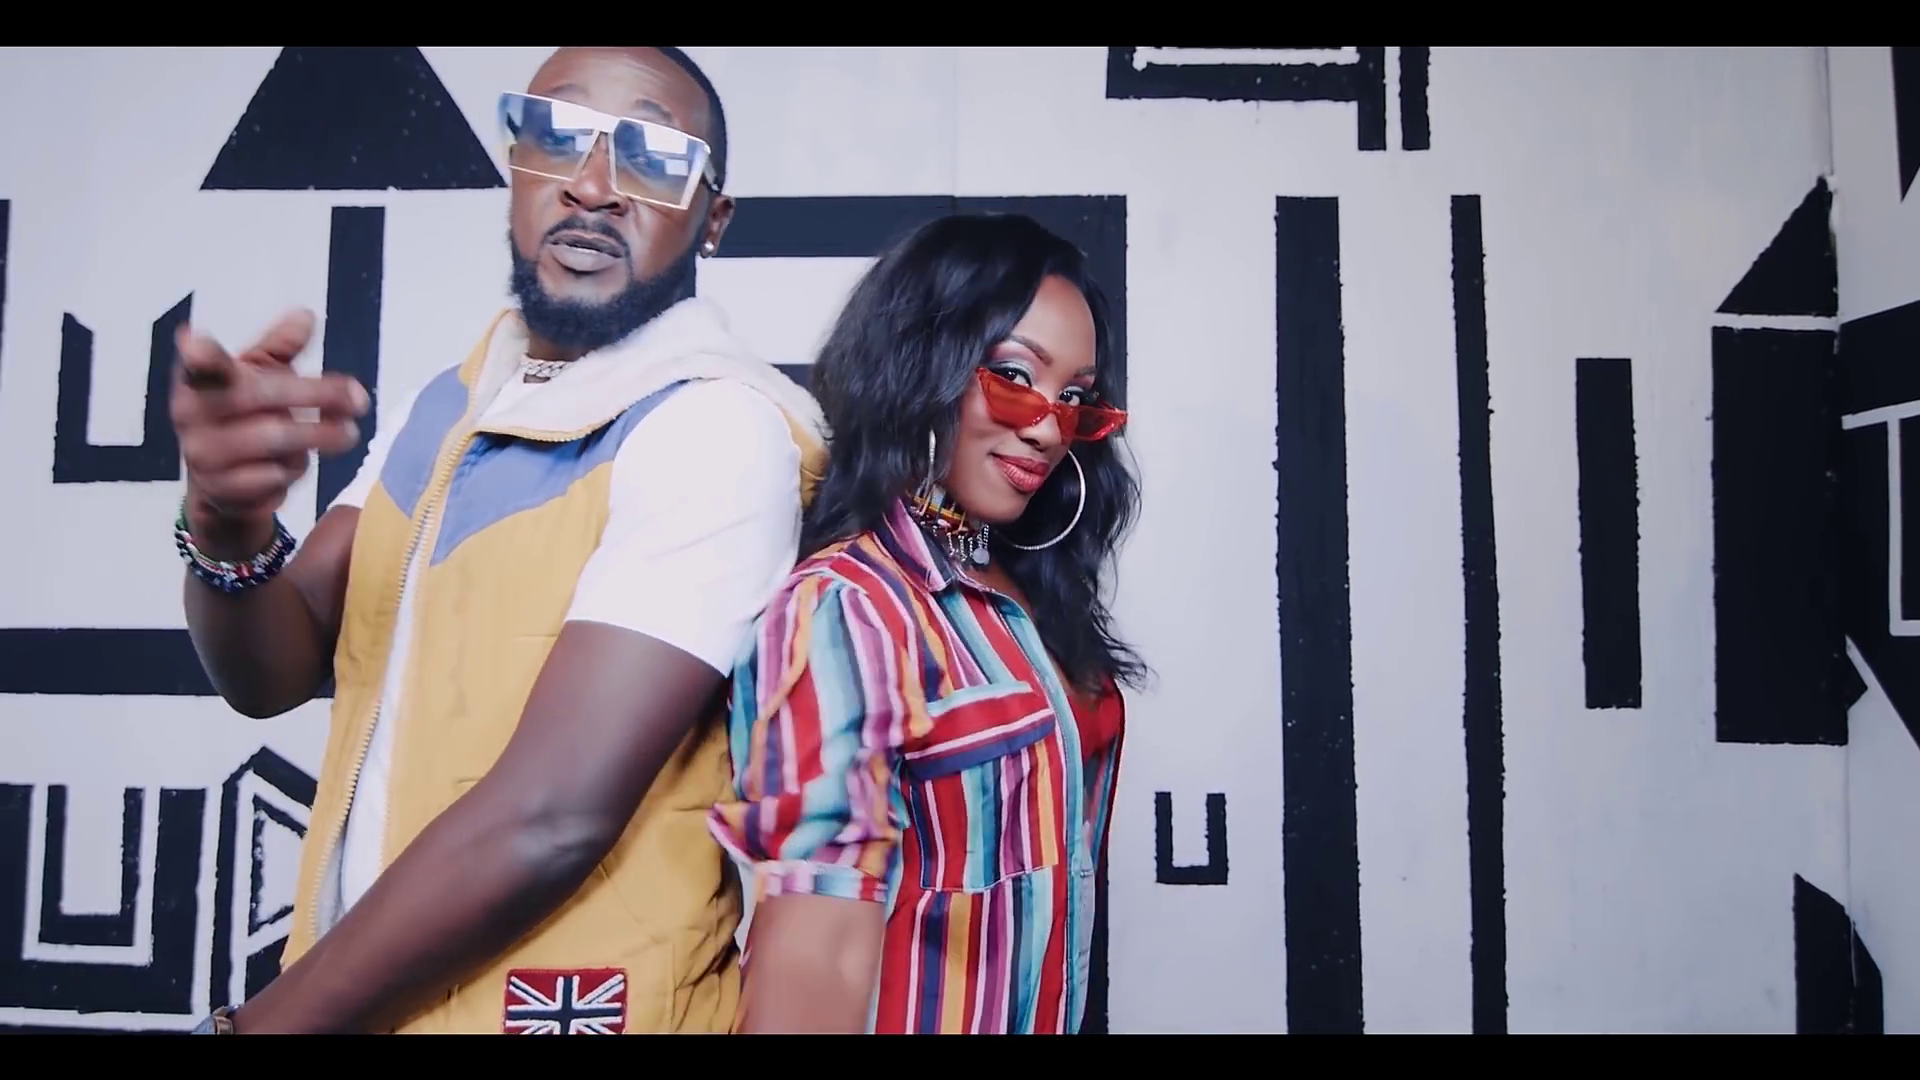 Big Pin and Mayonde in 'Juu' song video